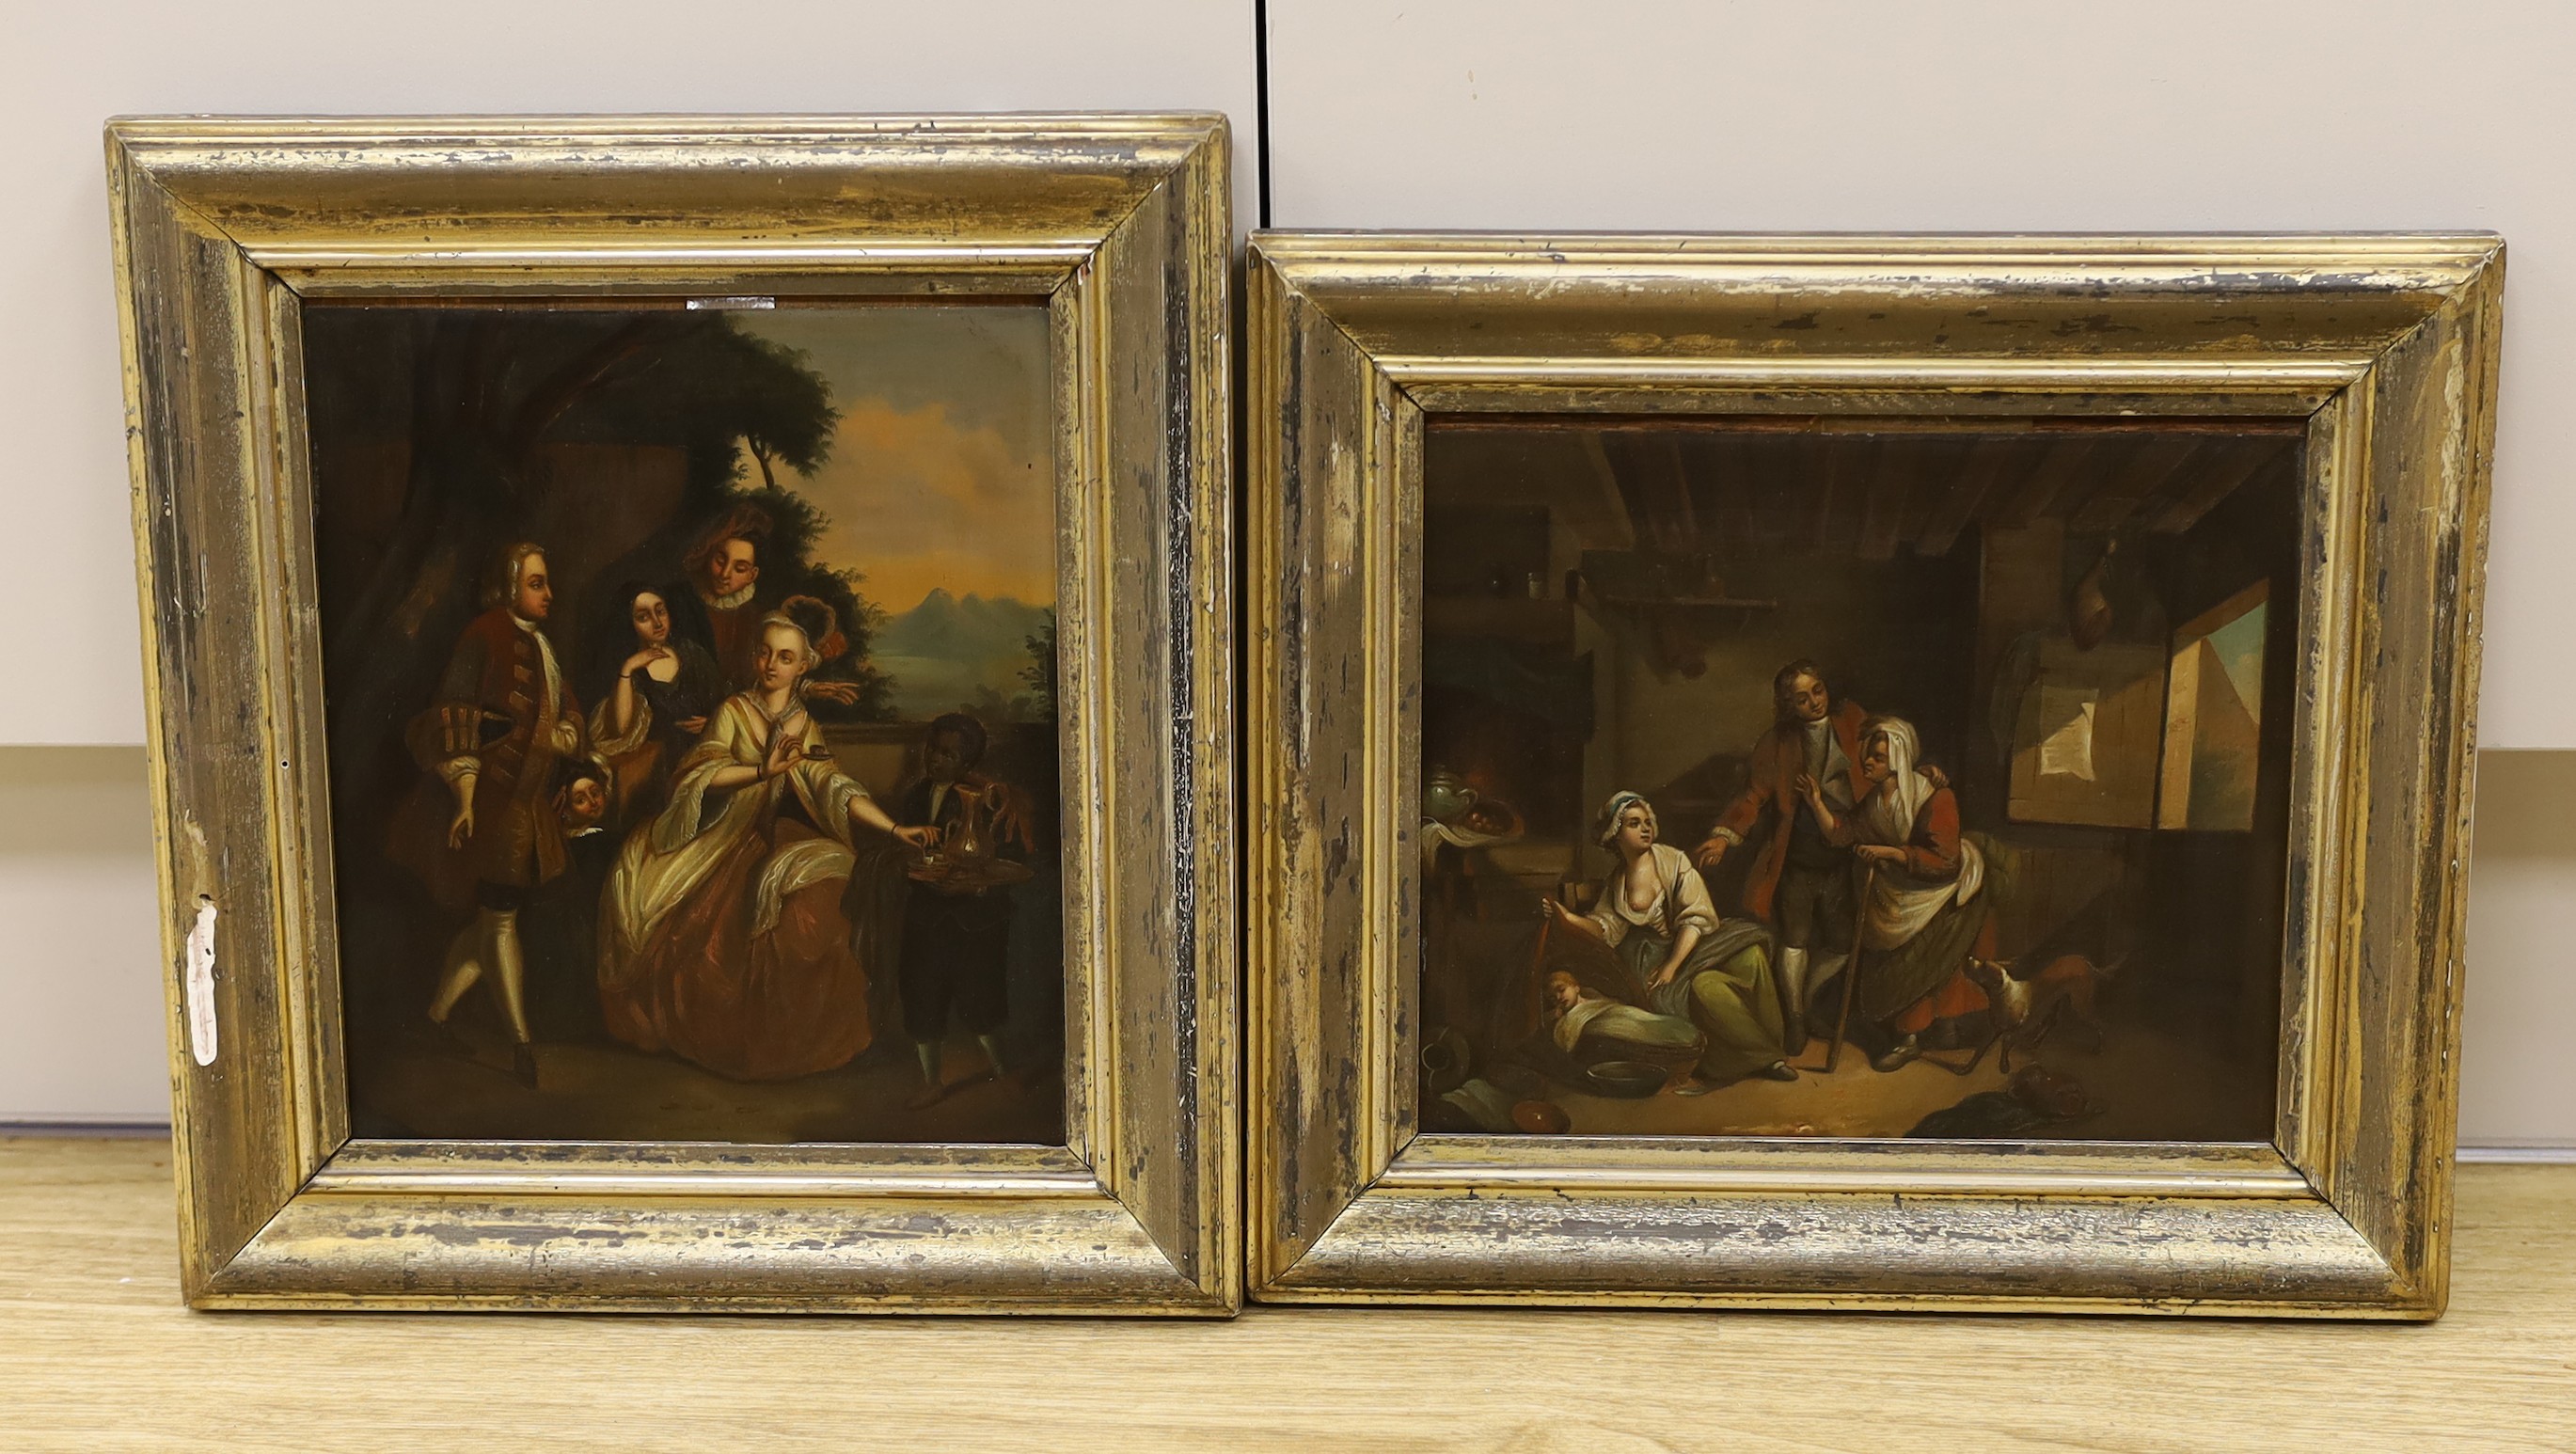 19th century German School, two oils on zinc, 18th century figures taking tea and Cottage interior, 25 x 21cm and 21 x 25cm